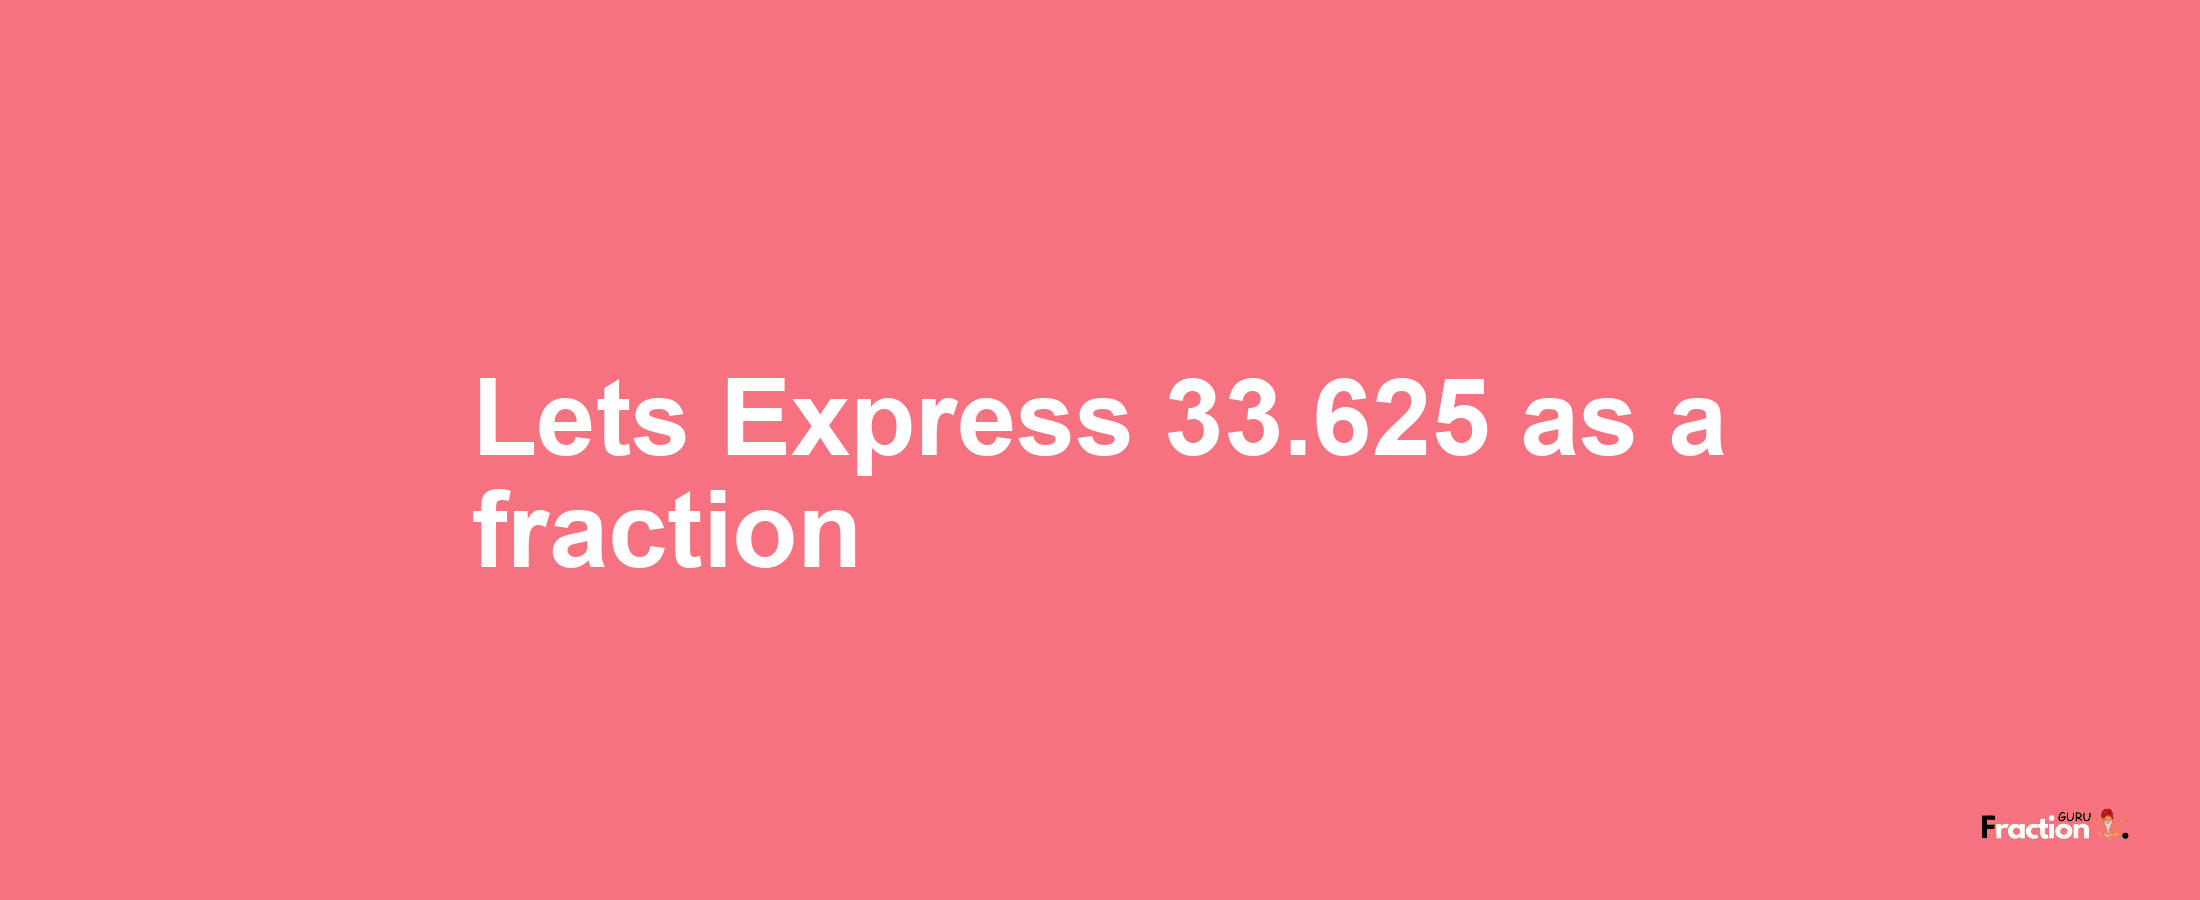 Lets Express 33.625 as afraction